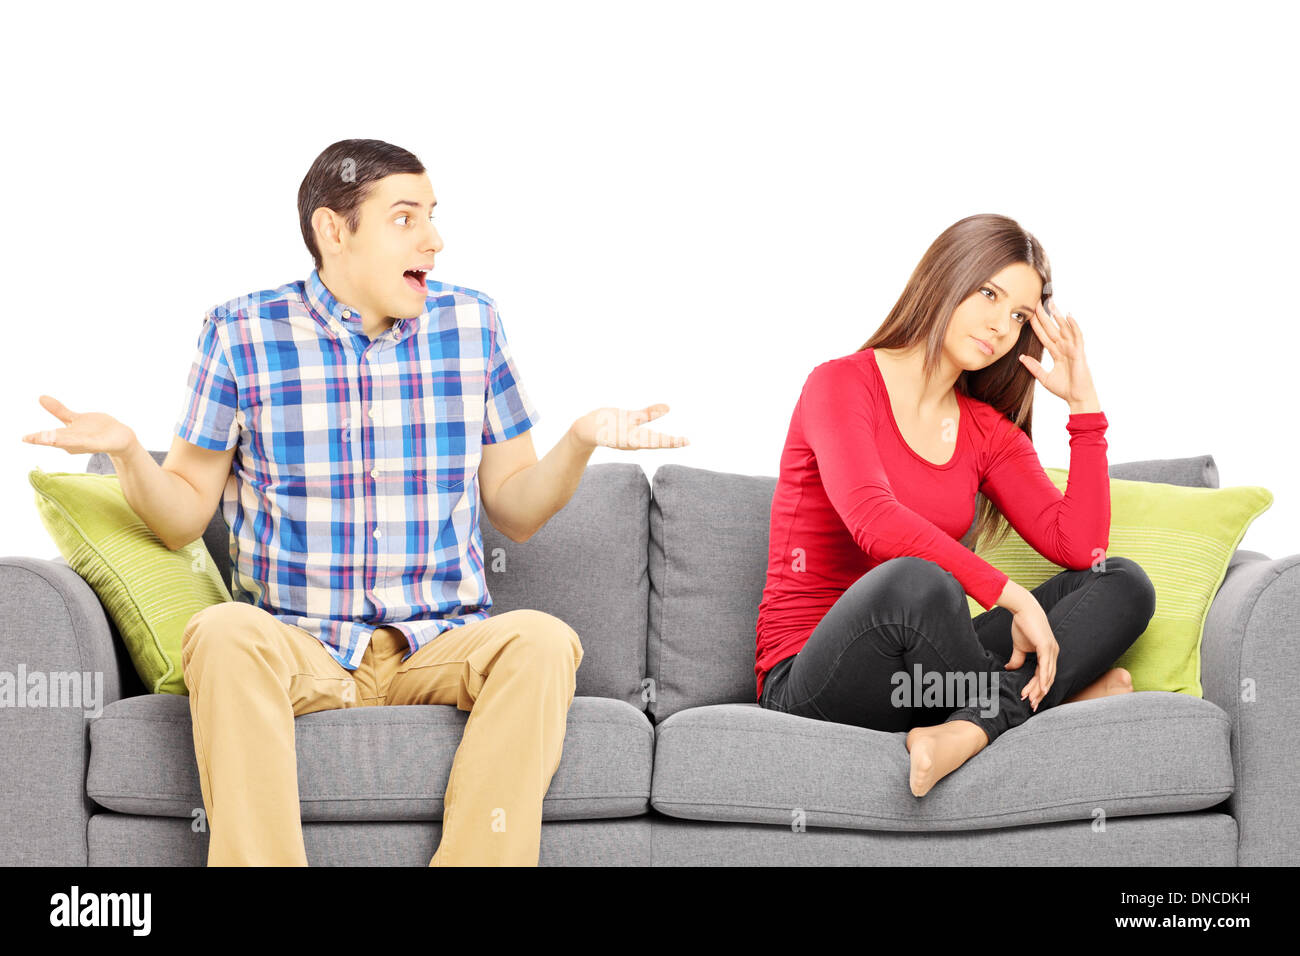 Young heterosexual couple sitting on a sofa during an argument Stock Photo